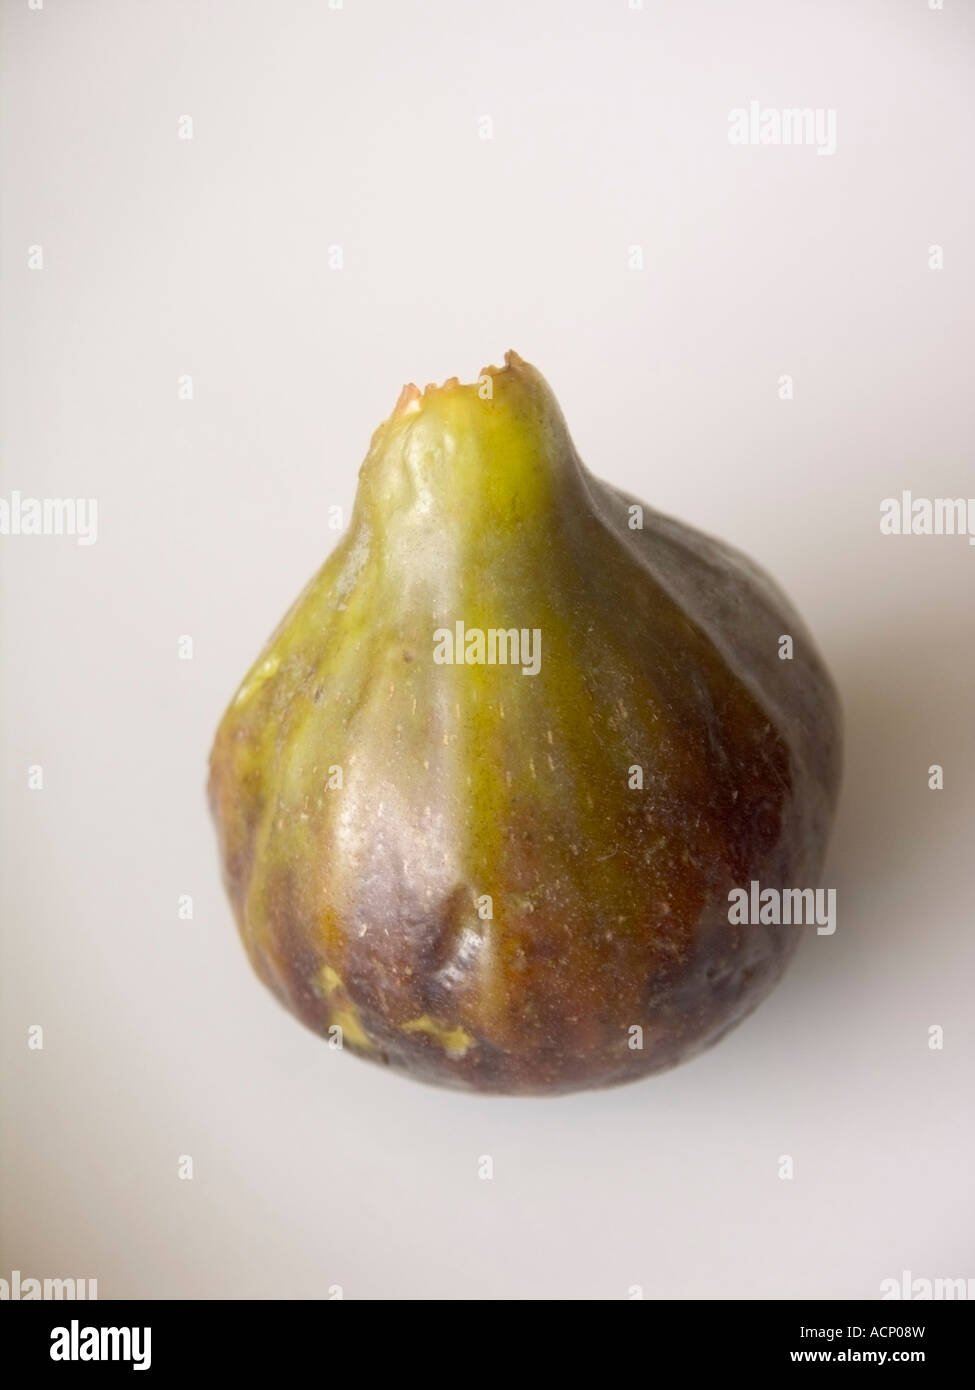 Suggestive  Common fig (Ficus carica), fruit on a white dish background Stock Photo